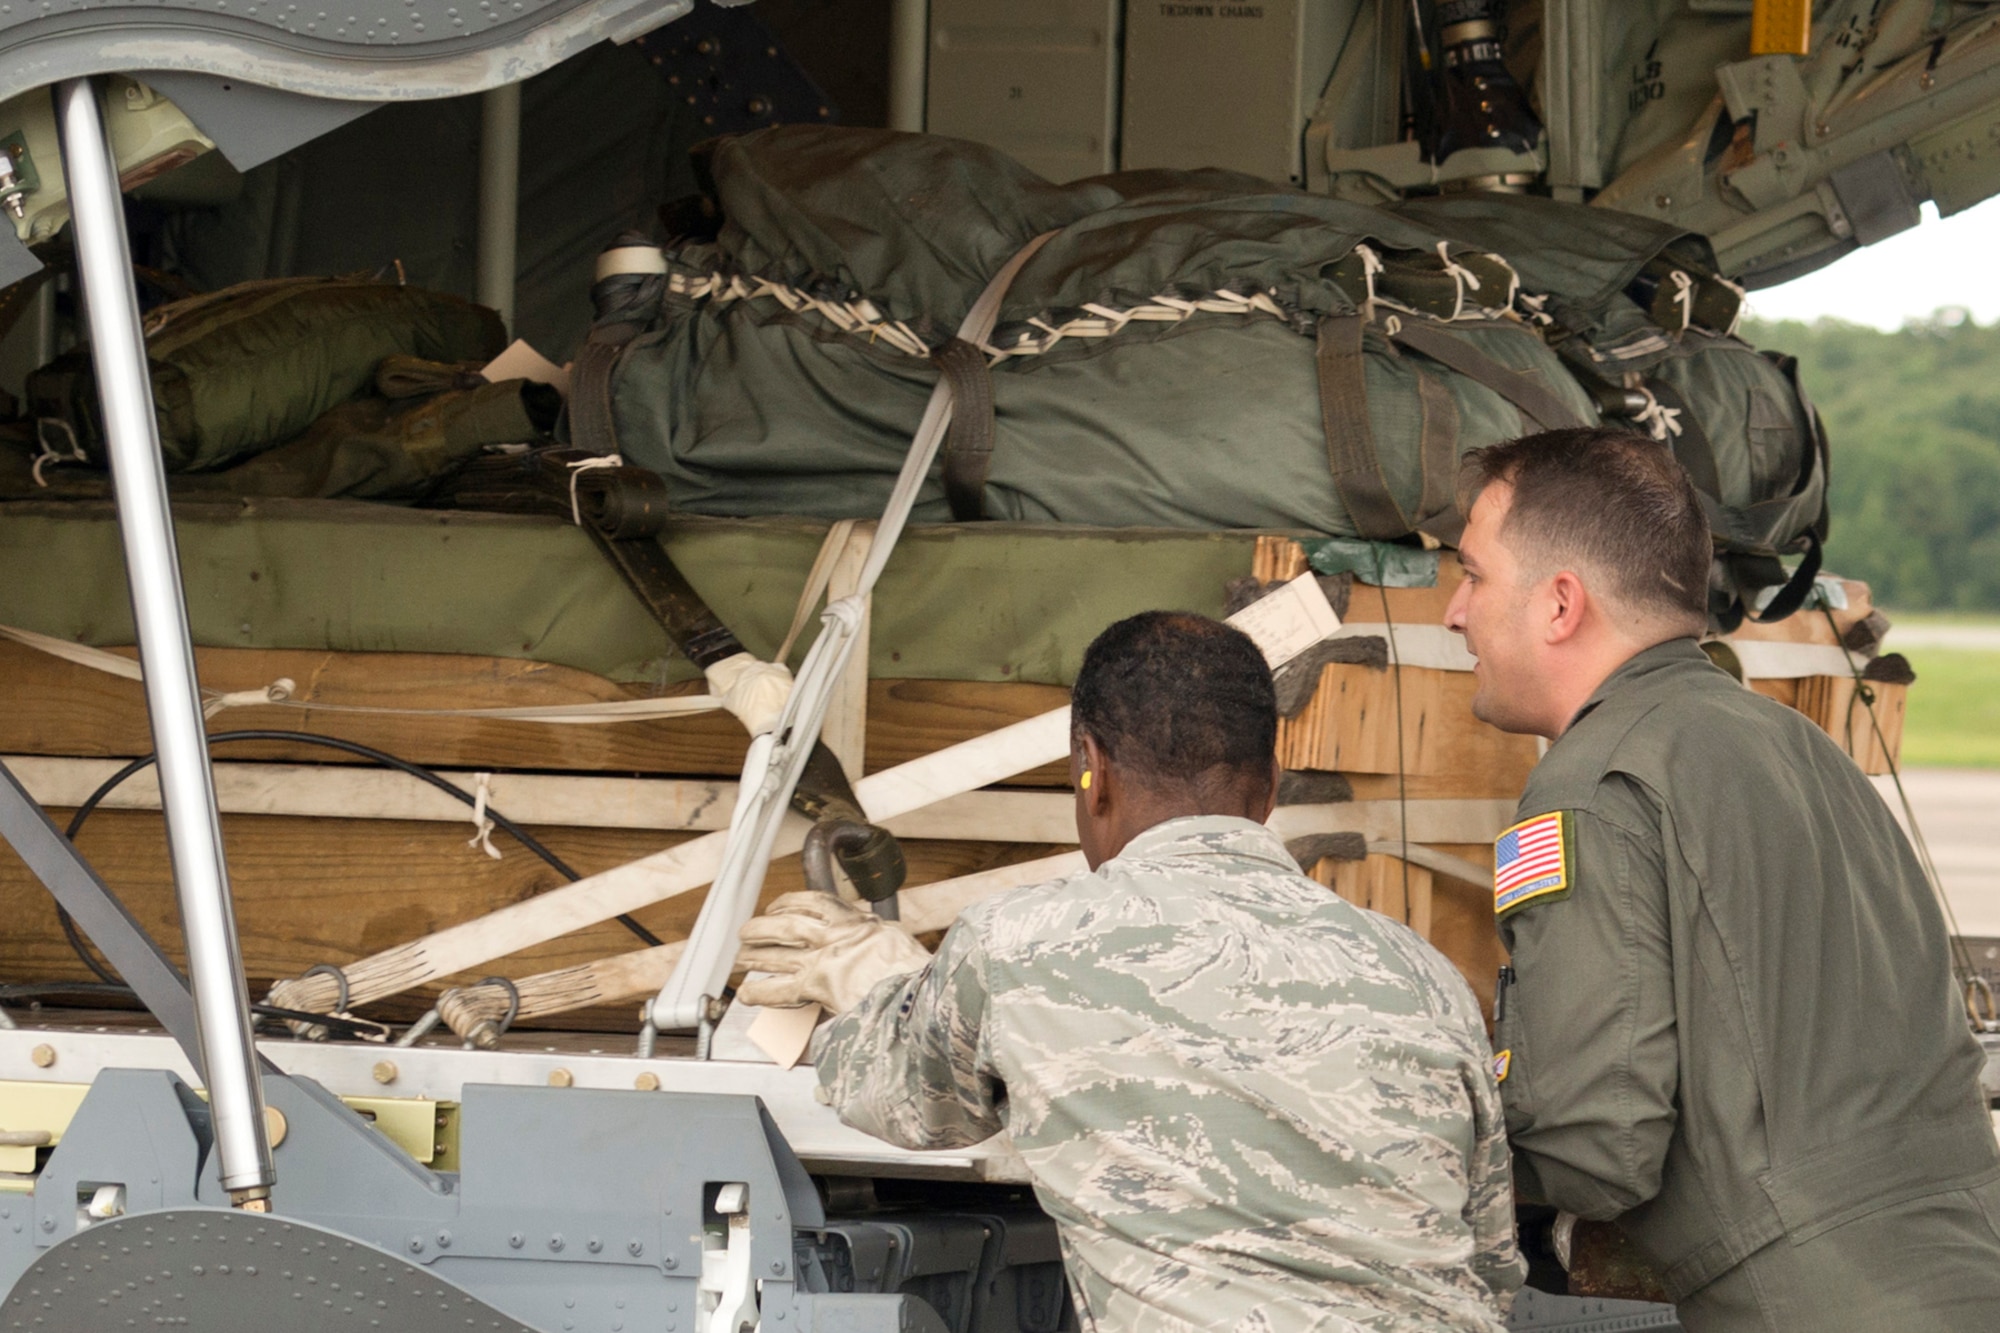 U.S. Air Force Reserve Master Sgt. Jimmy Massley (left) air transportation, 96th Aerial Port Squadron and Master Sgt. John R. Metcalf Jr., a 327th Airlift Squadron loadmaster, push a pallet onto a C-130J on the ramp at Little Rock Air Force Base, Ark., Aug. 13, 2016. The two Airmen helped in passing a milestone for the 913th Airlift Group by flying the first C-130J two-ship mission during a Unit Assembly Training weekend. (U.S. Air Force photo by Master Sgt. Jeff Walston) 